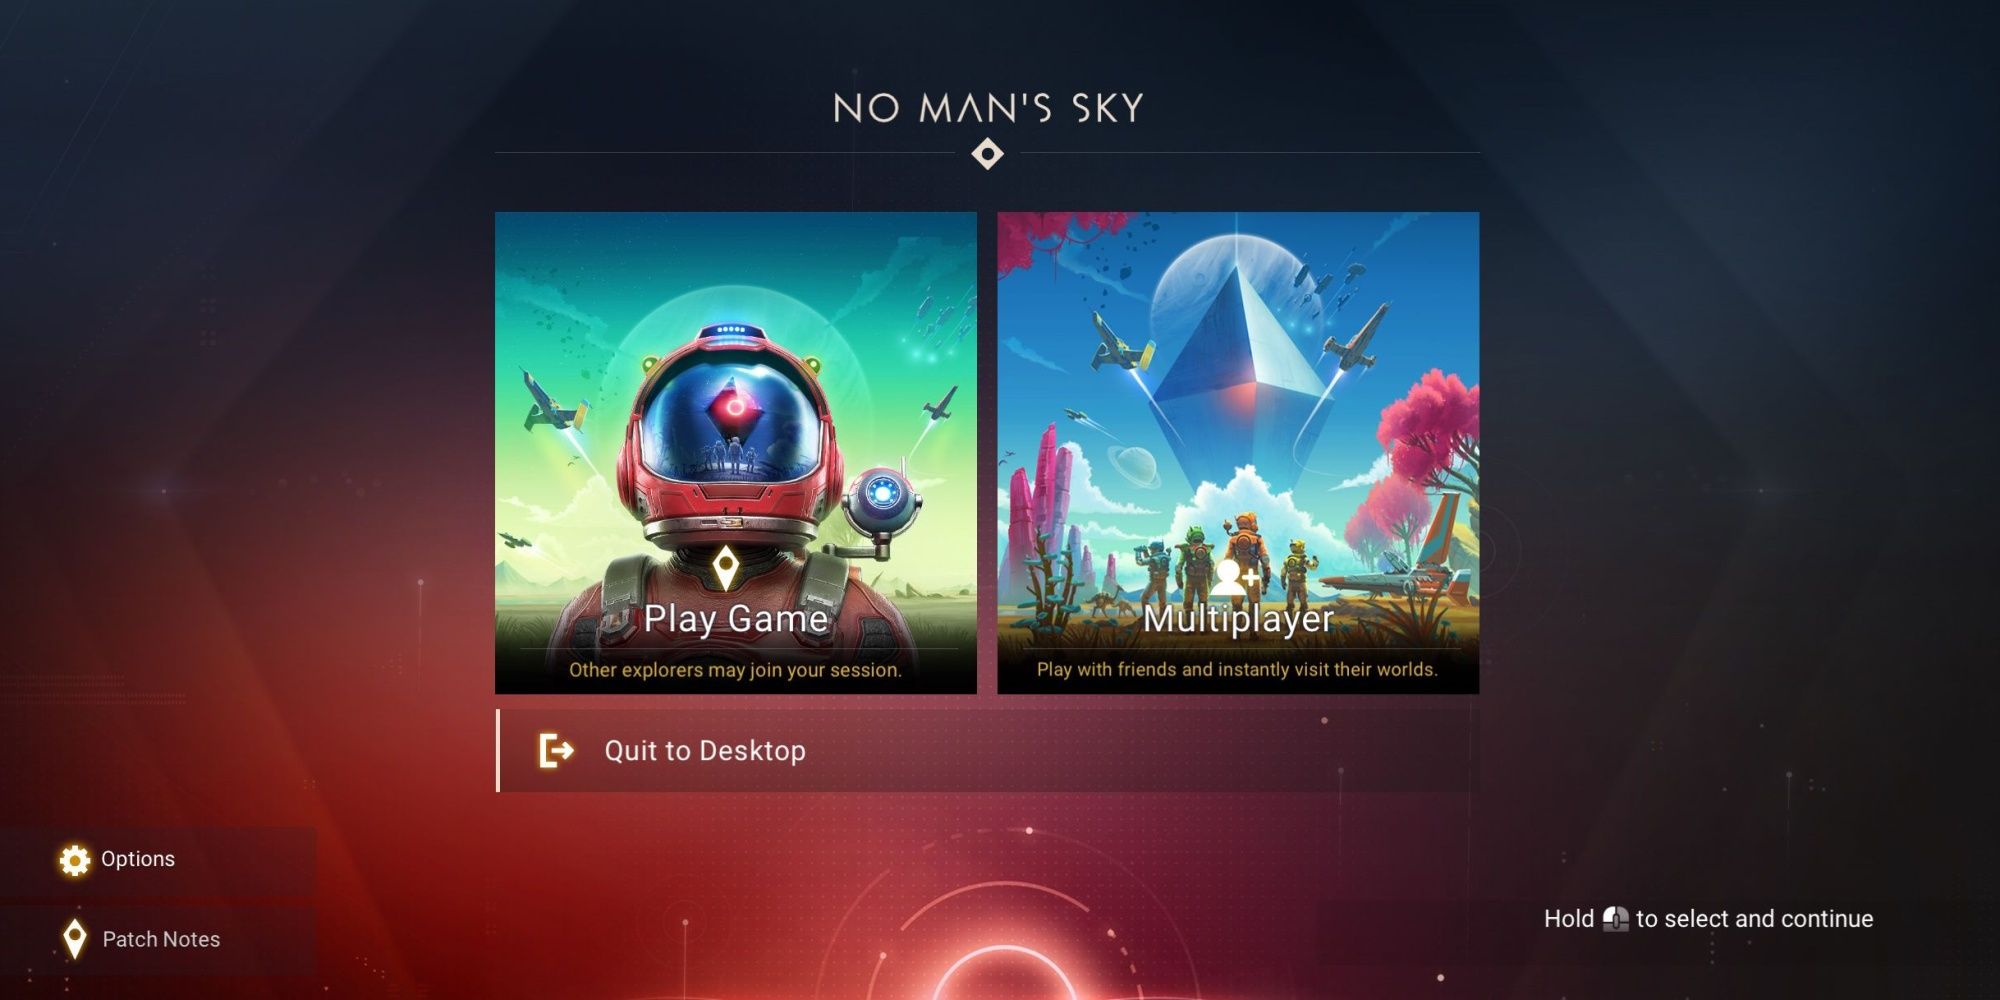 No Man's Sky: Menu Showing Single Player And Multiplayer Options